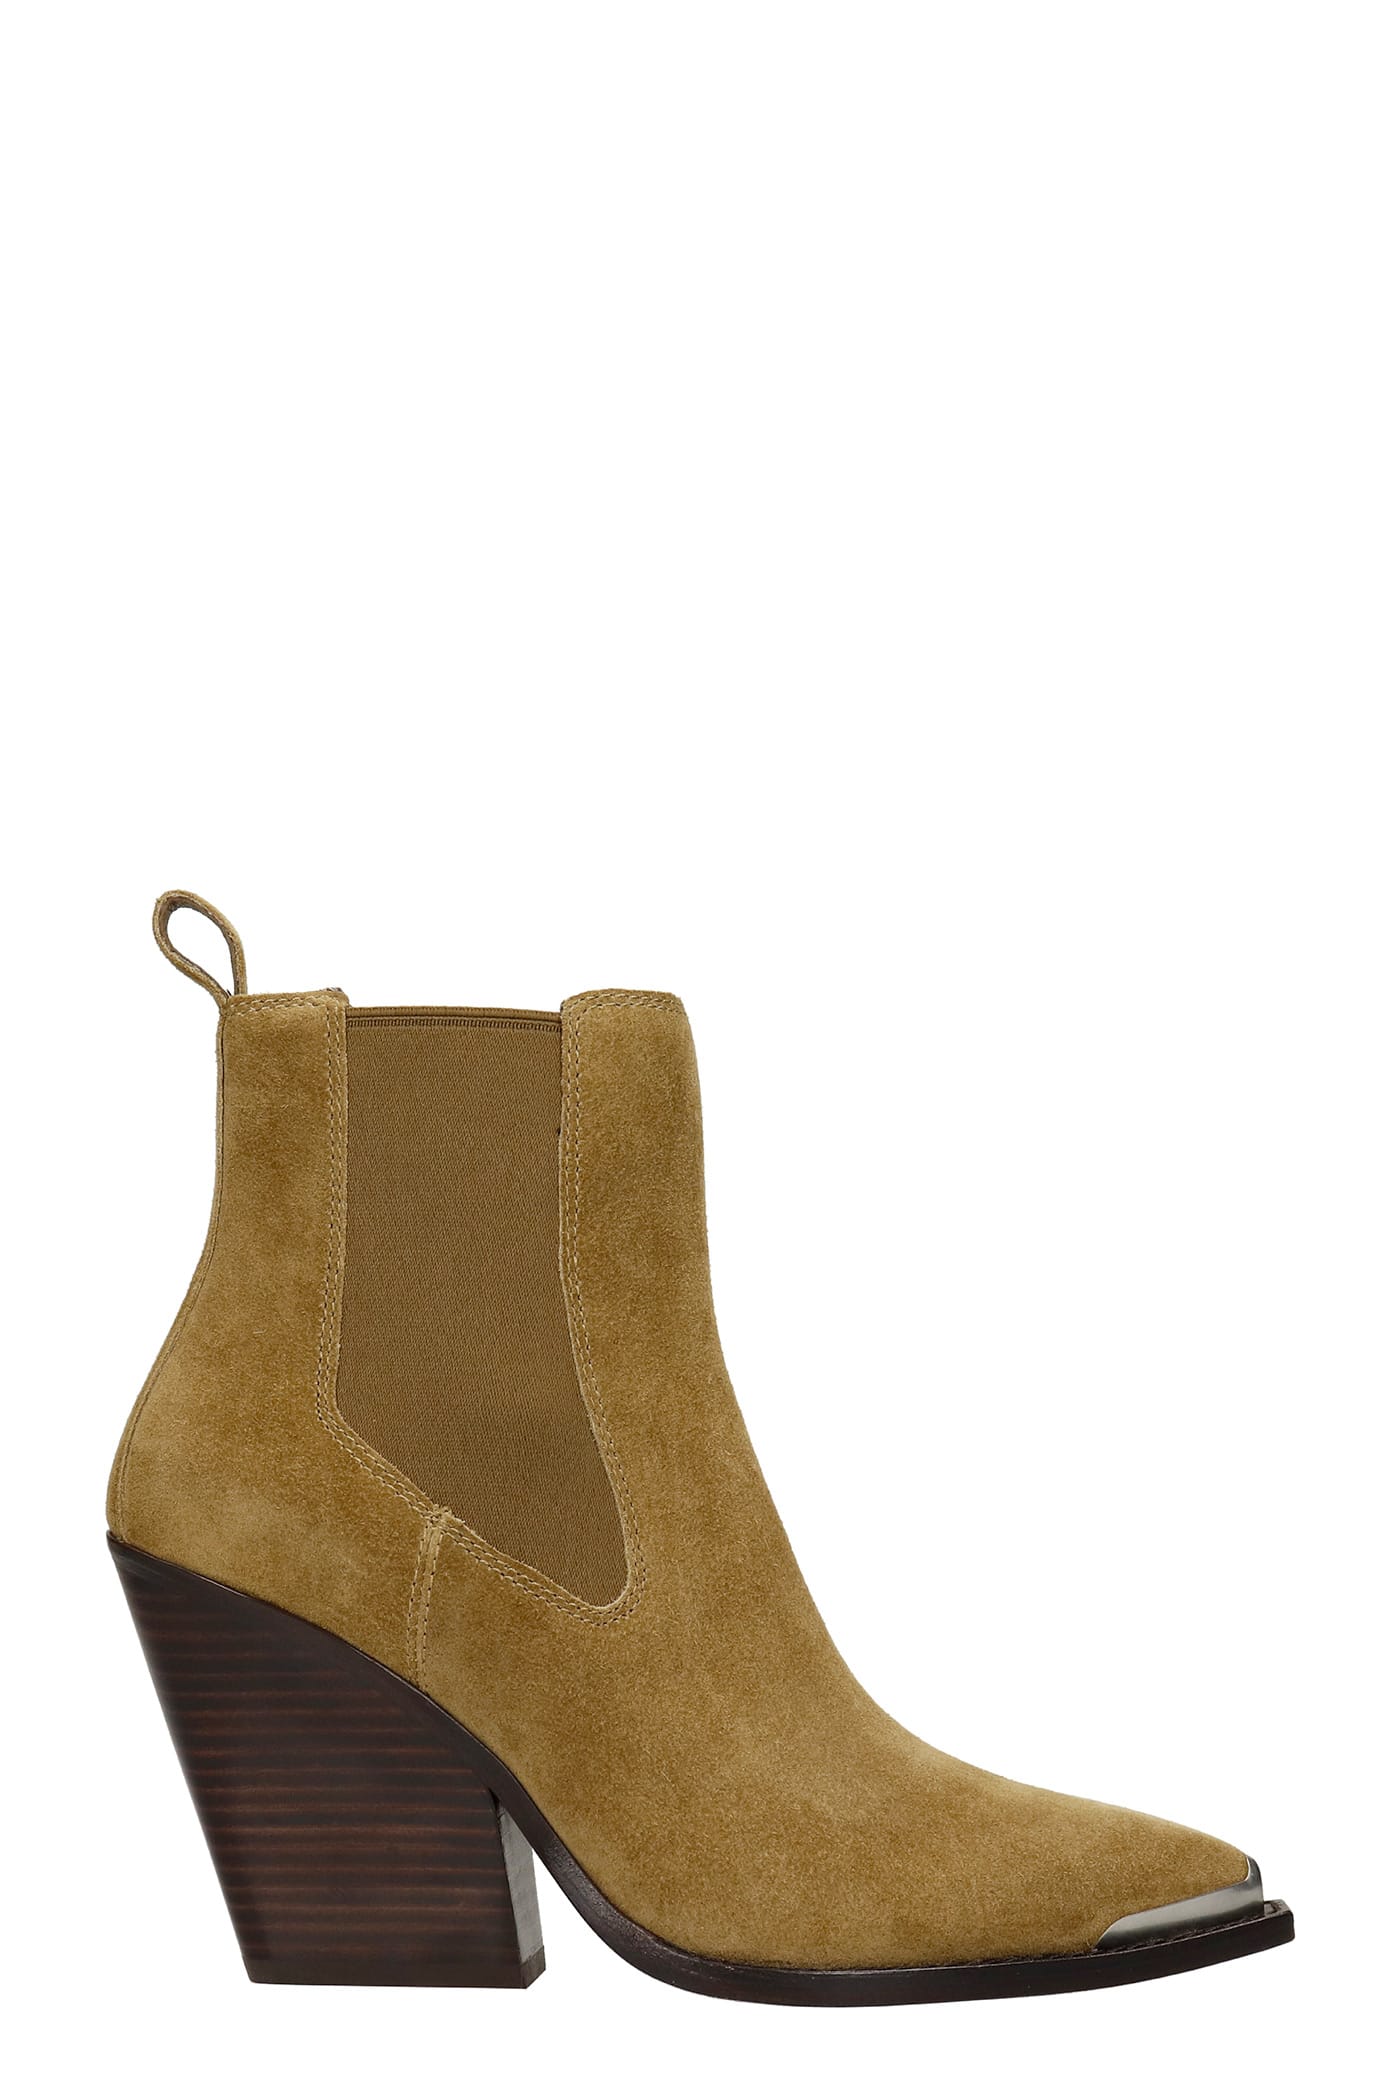 Ash Bowie Texan Ankle Boots In Brown Suede